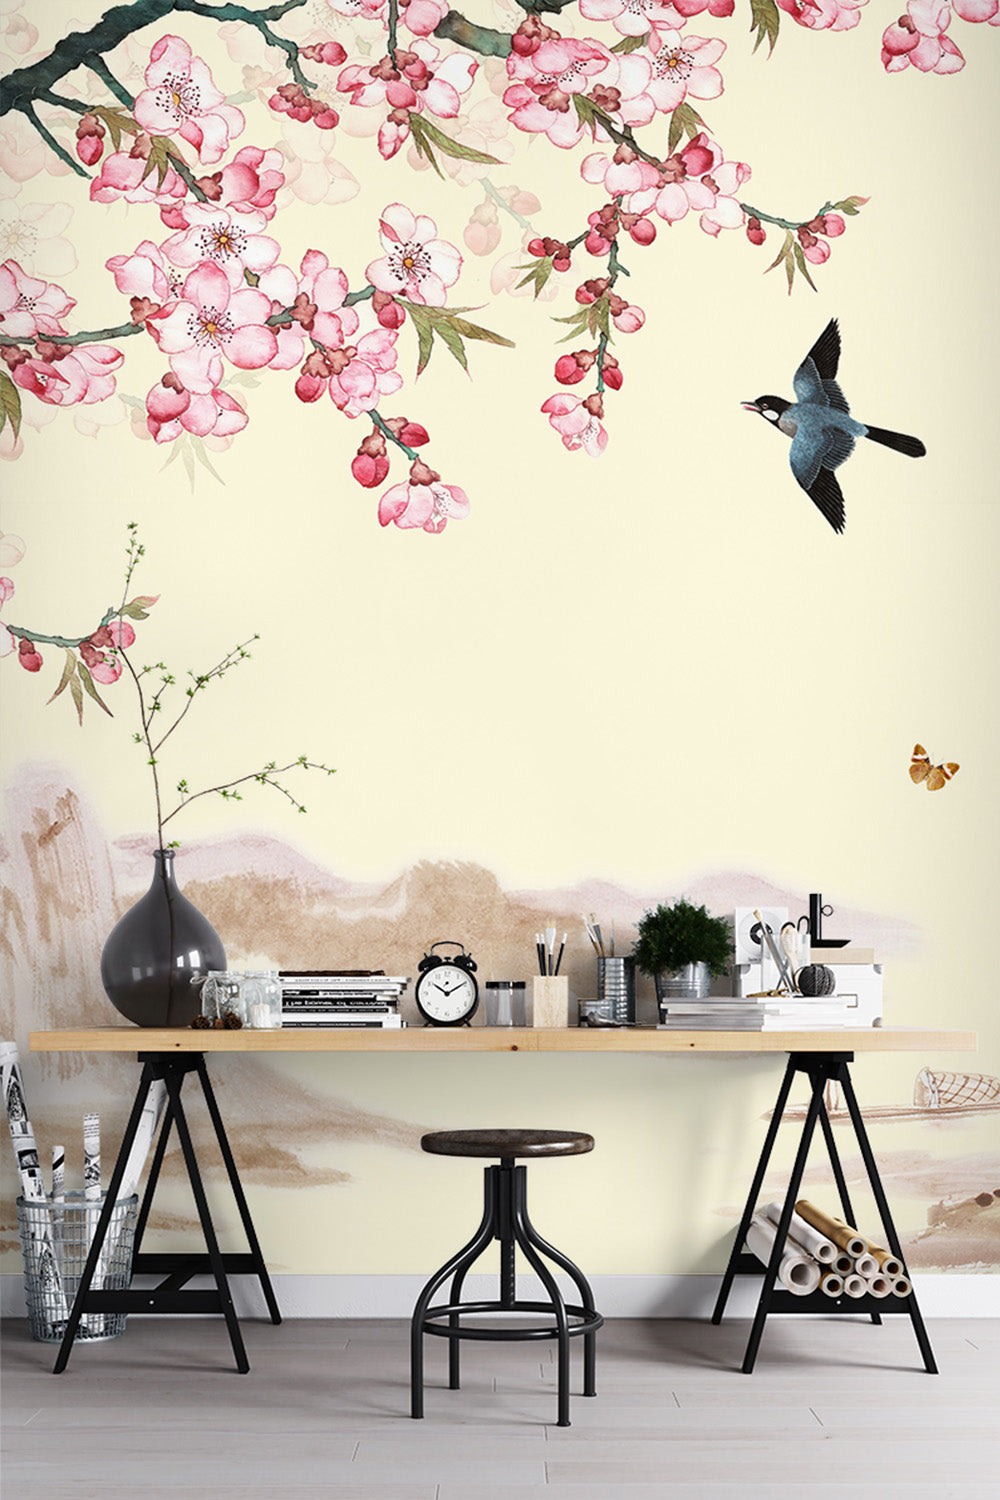 Japanese Cherry Blossom Painting Wallpaper Mural, Magpie Floral Flowers Pink Wallpaper, Self-Adhesive Peel And Stick 3D Wall Paper,Removable Australian Company Wall Decor